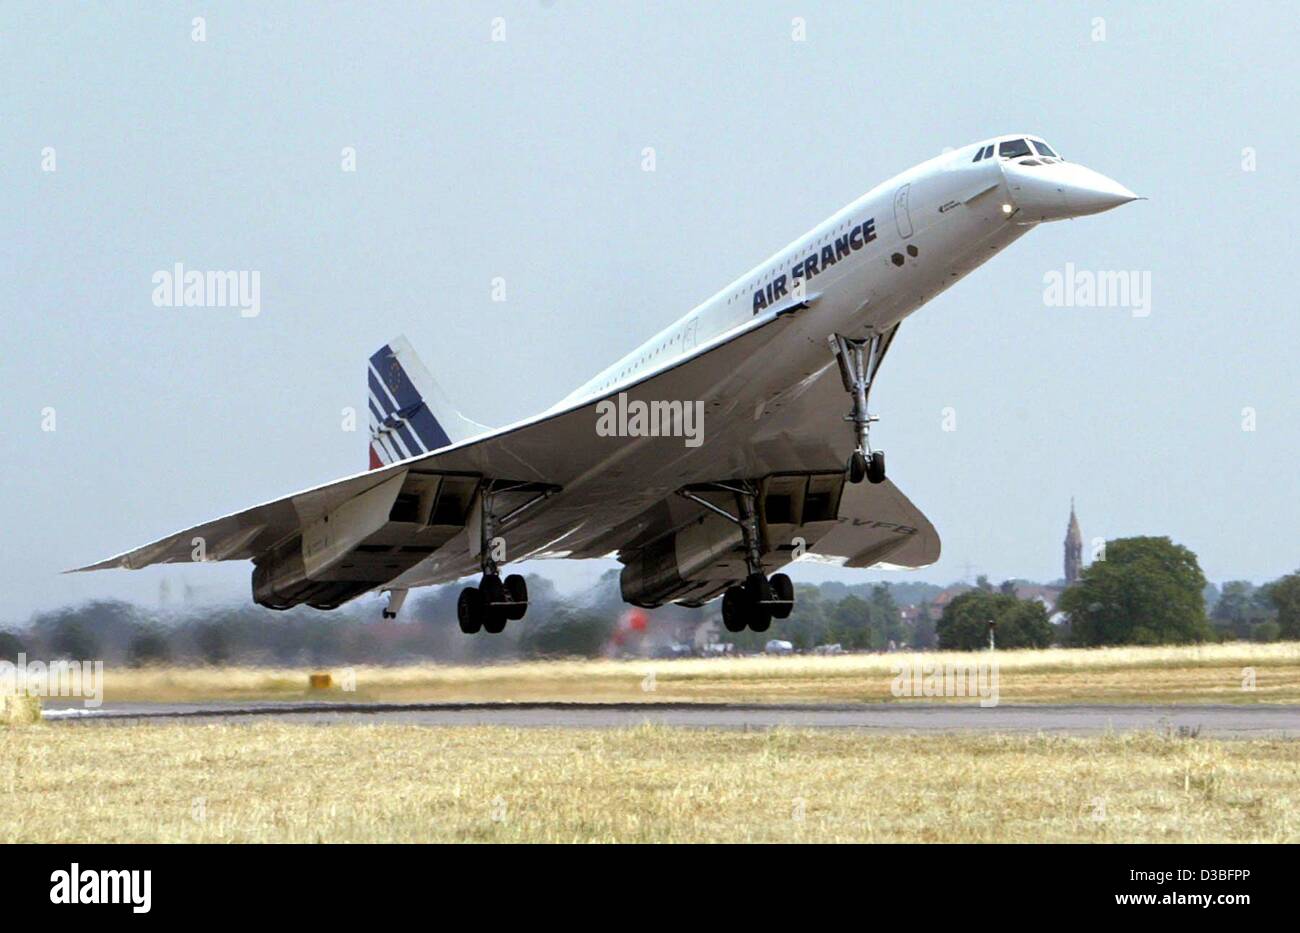 (dpa) - The last flight of an Air France Concorde supersonic airplane ends at the Karlsruhe-Baden-Baden airport in Soellingen-Rheinmuenster, Germany, 24 June 2003. The plane, taken off service by Air France, will be transported to a permament exhibition at the Technique Museum at Sinsheim, close to  Stock Photo